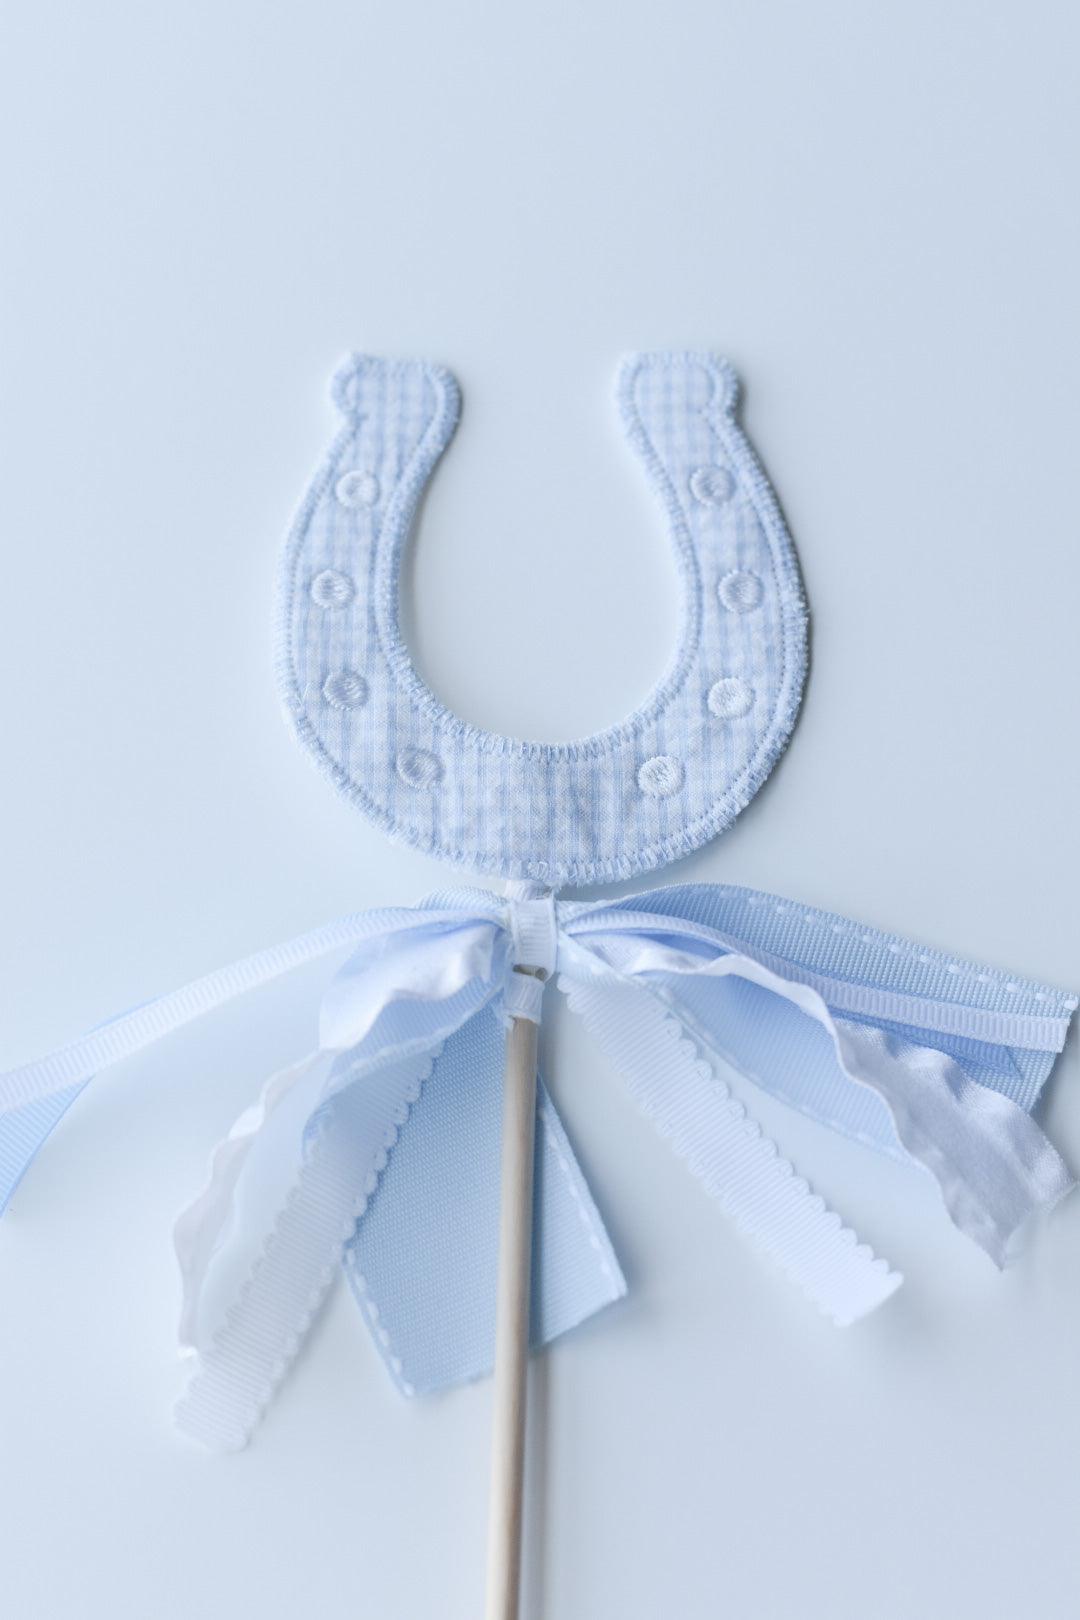 Cake Topper - Derby Horseshoe | Nashville Bow Co. - Classic Hair Bows, Bow Ties, Basket Bows, Pacifier Clips, Wreath Sashes, Swaddle Bows. Classic Southern Charm.